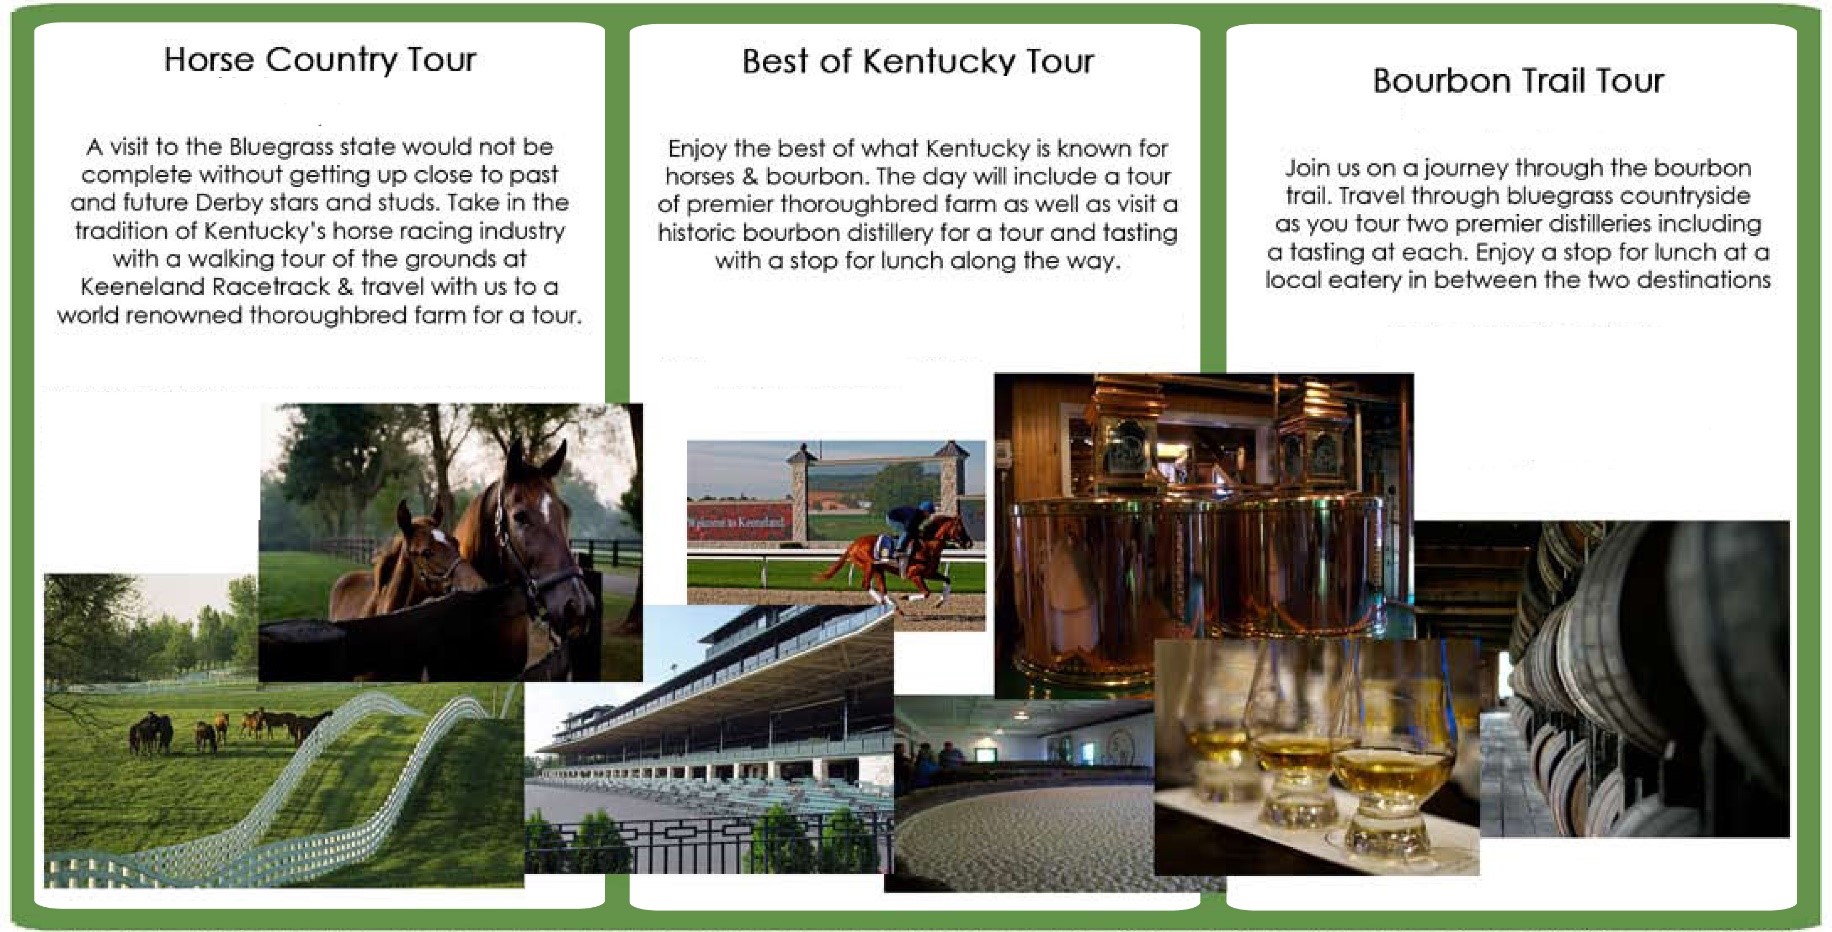 Kentucky Derby hotels downtown and best deals.  WHERE TO STAY, ACCOMMODATIONS for Kentucky Derby Hotels